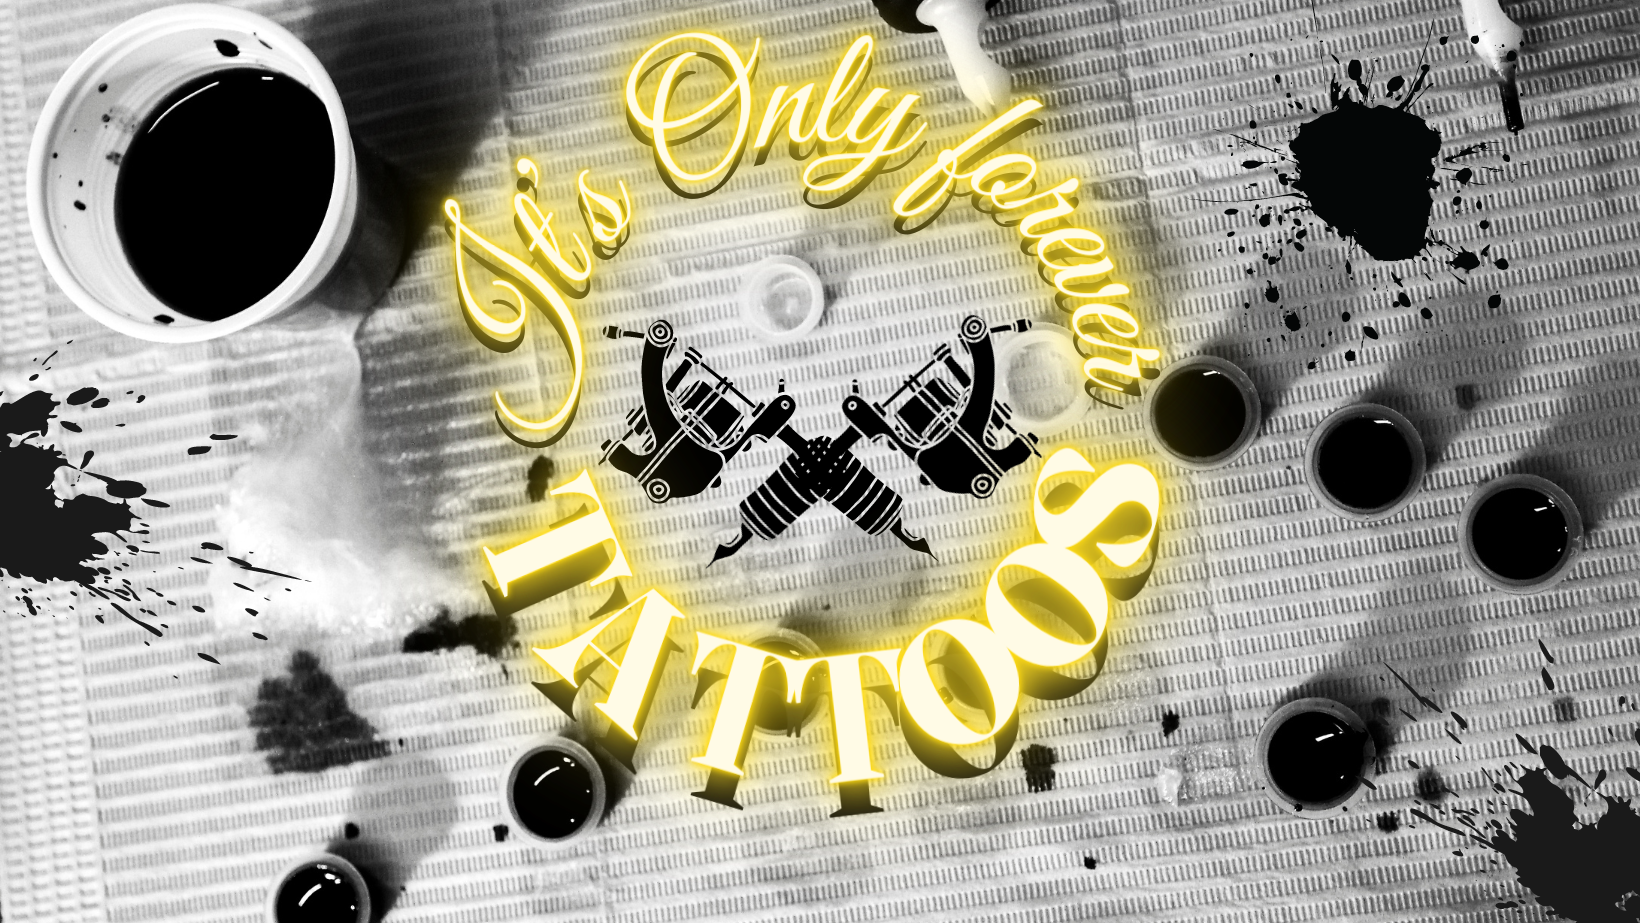 Its Only Forever Tattoos LLC